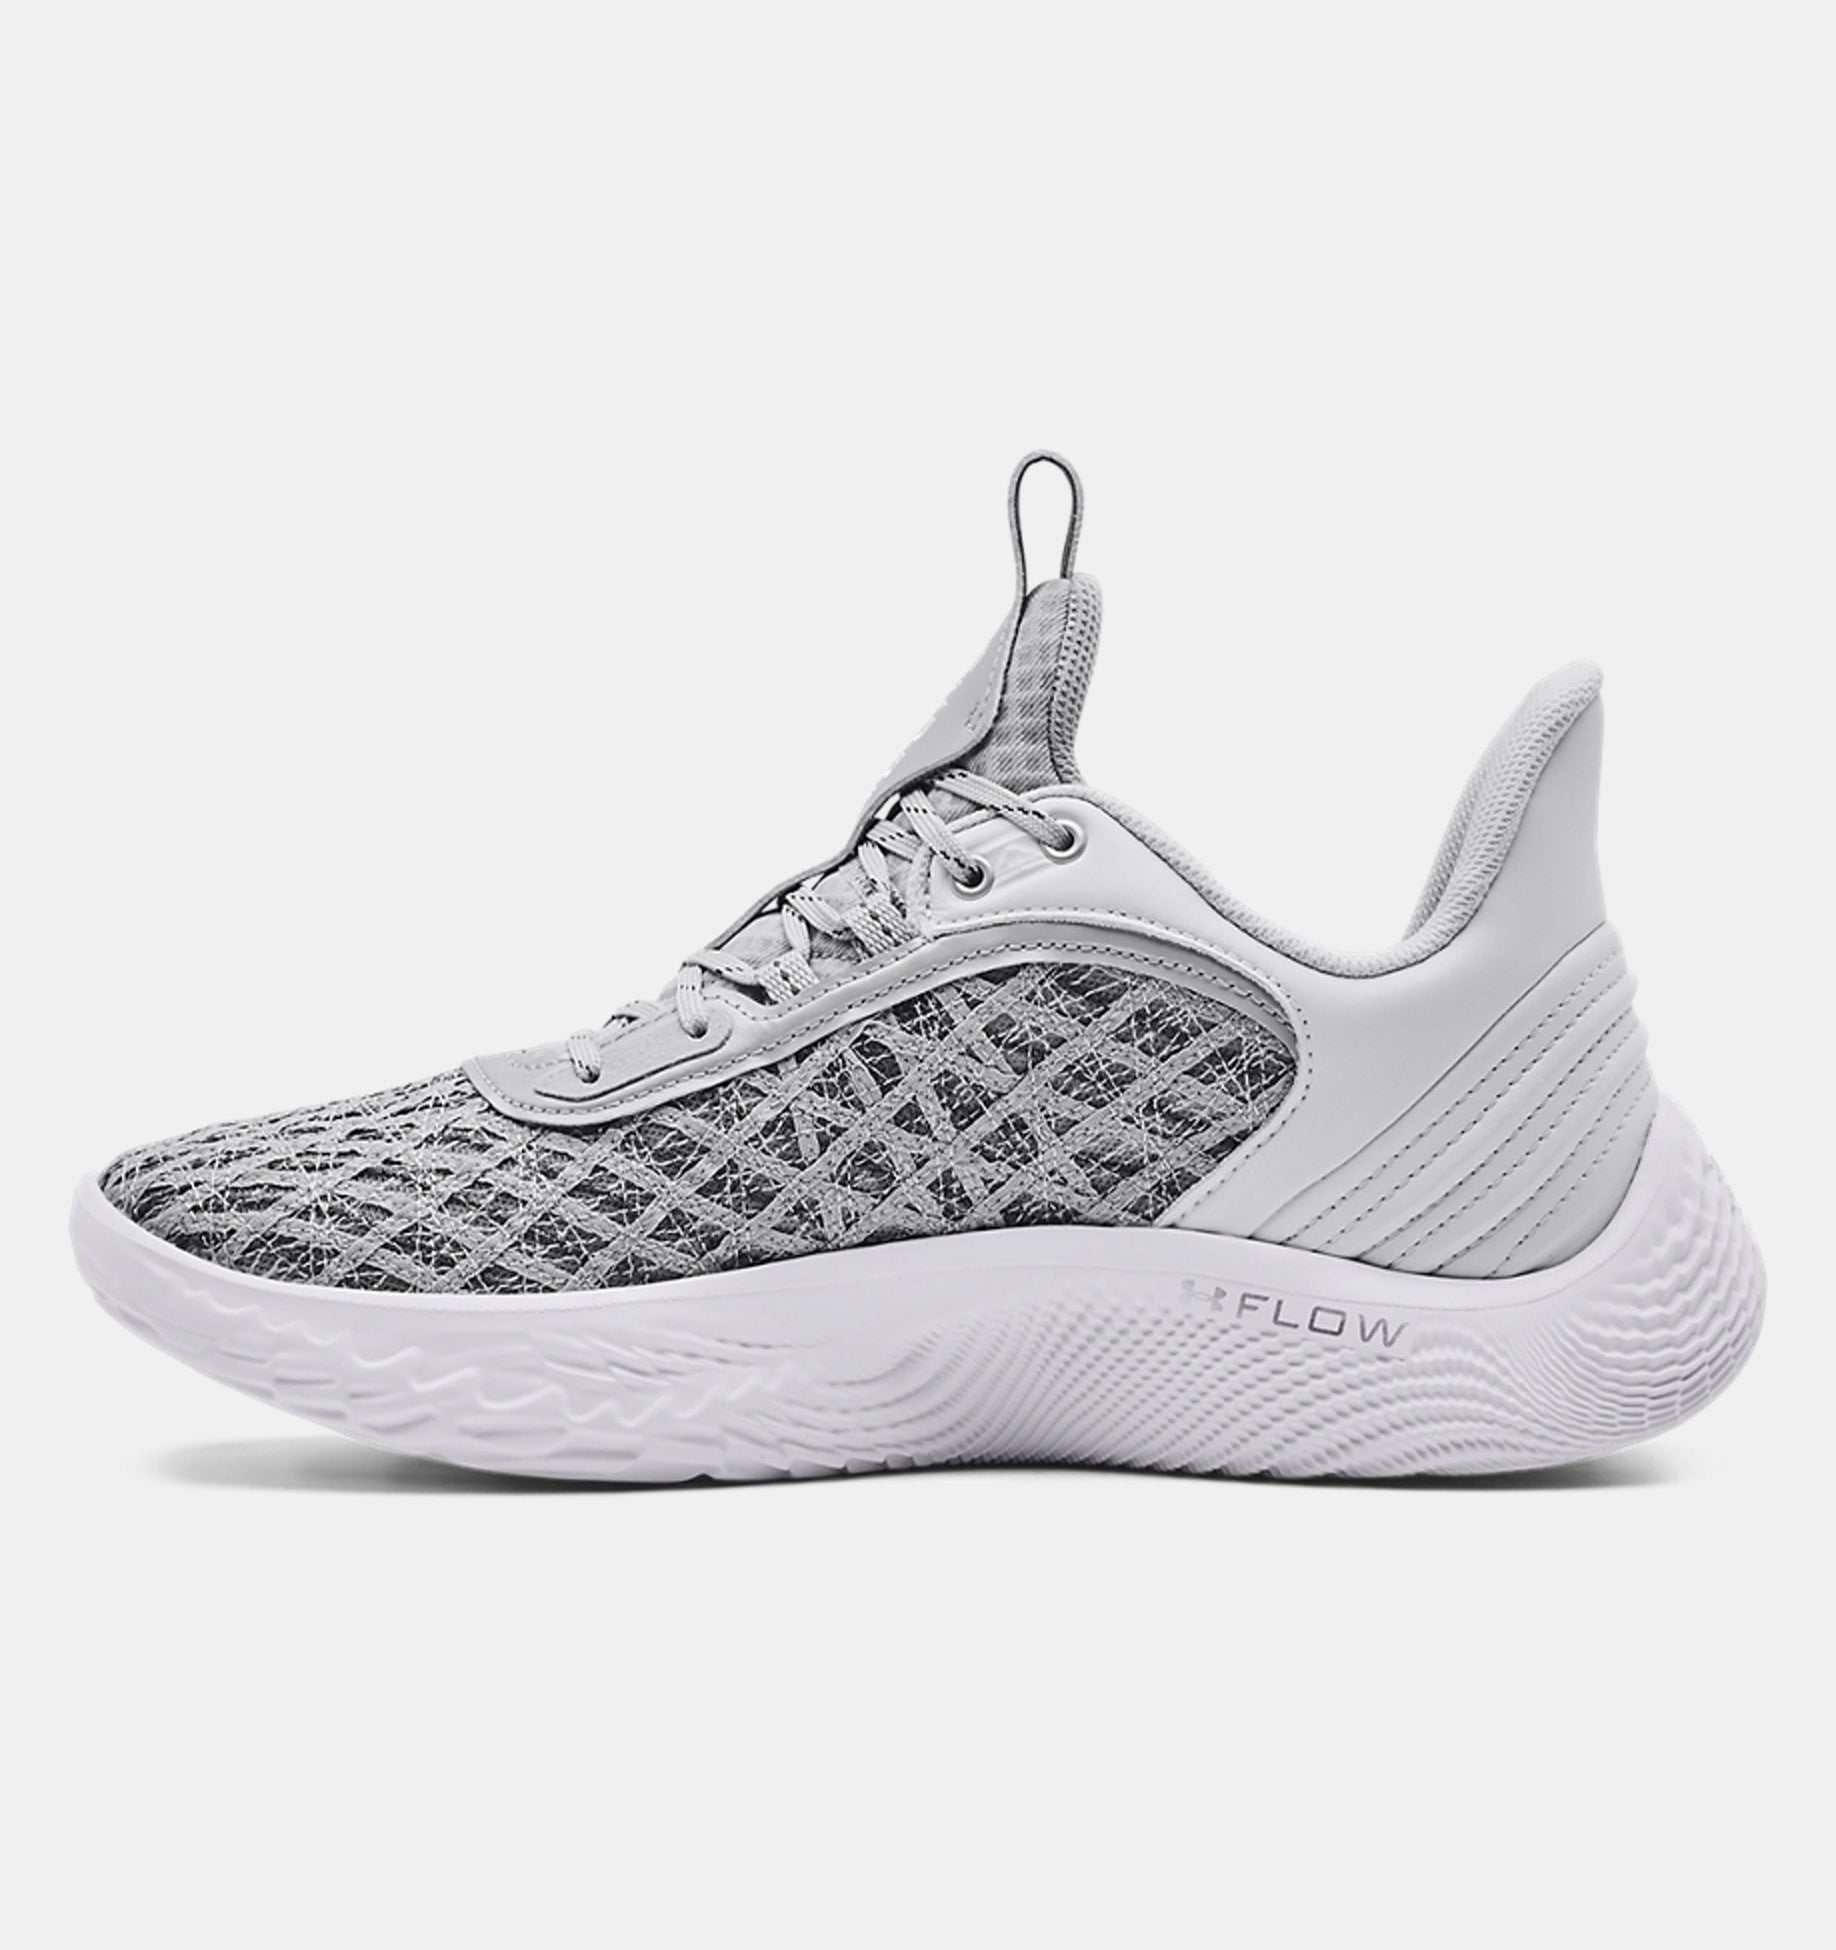 Under Armour Curry Flow 9 Basketball Shoes, Men's, M9/W10.5, White/Grey